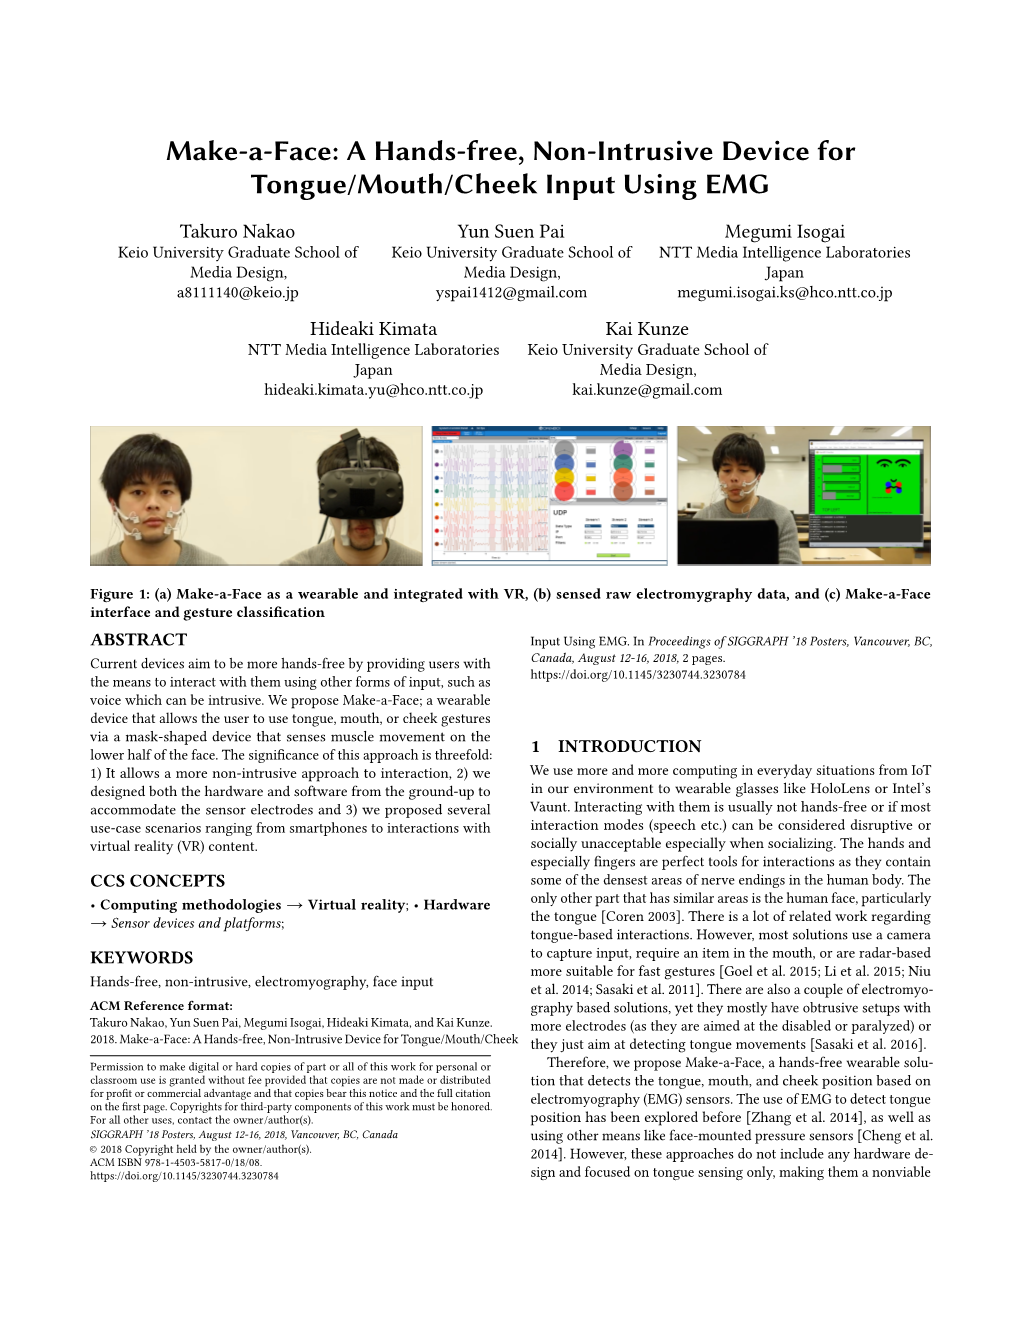 A Hands-Free, Non-Intrusive Device for Tongue/Mouth/Cheek Input Using EMG